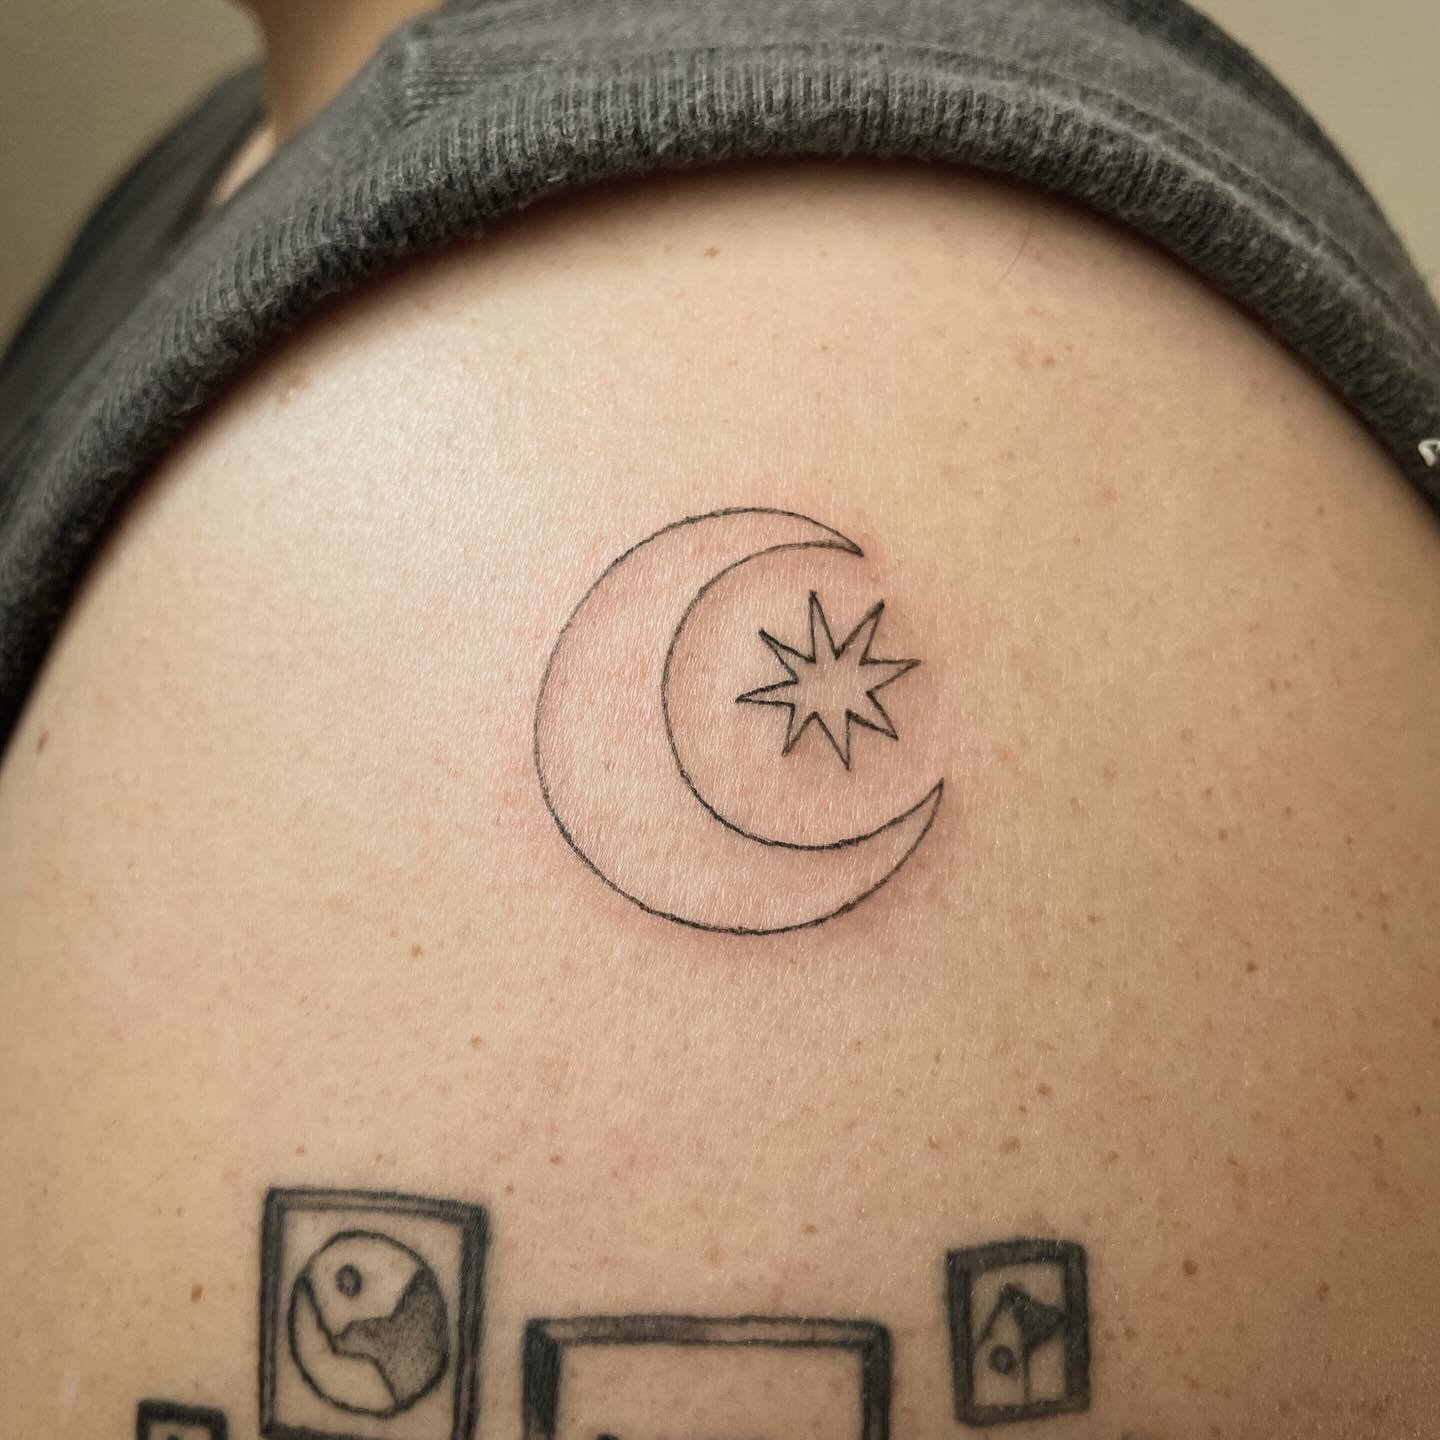 just feeling really greatful for every single person who has come to me for a tattoo. after being a graphic designer for 15 years and working behind a computer, one of the reasons i wanted to start tattooing is to build community in real life in this